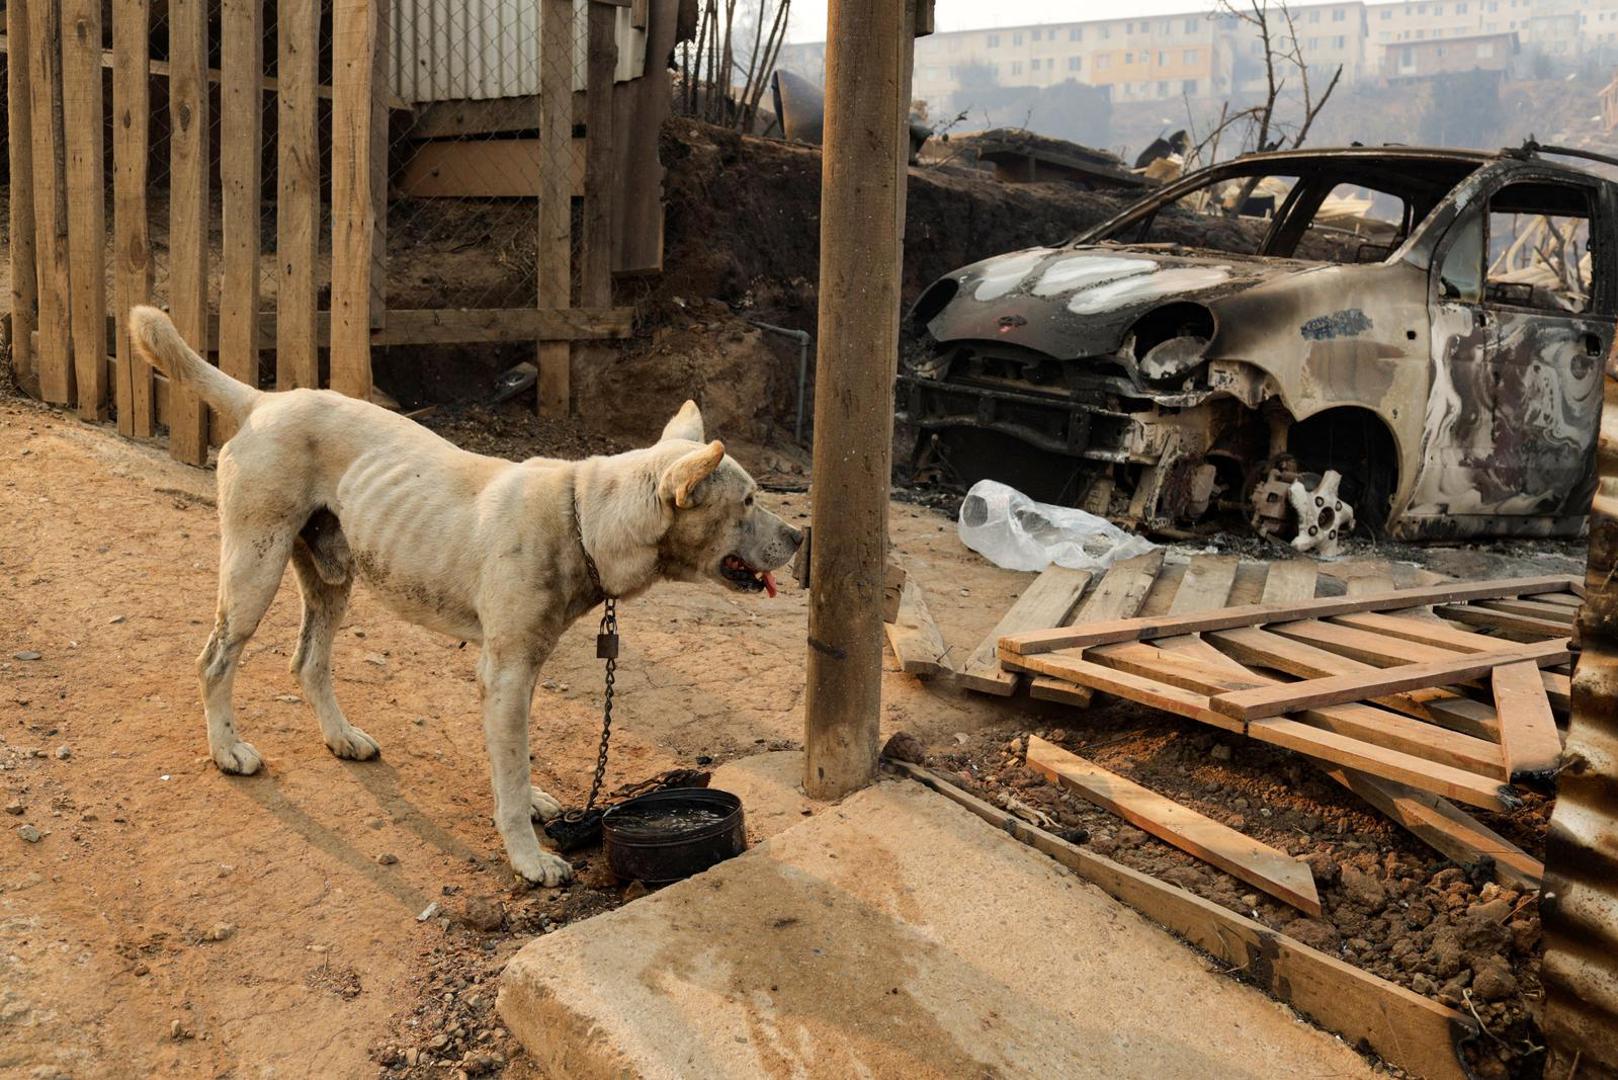 A dog stands near the remains of burnt houses following the spread of wildfires in Vina del Mar, Chile February 3, 2024. REUTERS/Sofia Yanjari Photo: SOFIA YANJARI/REUTERS